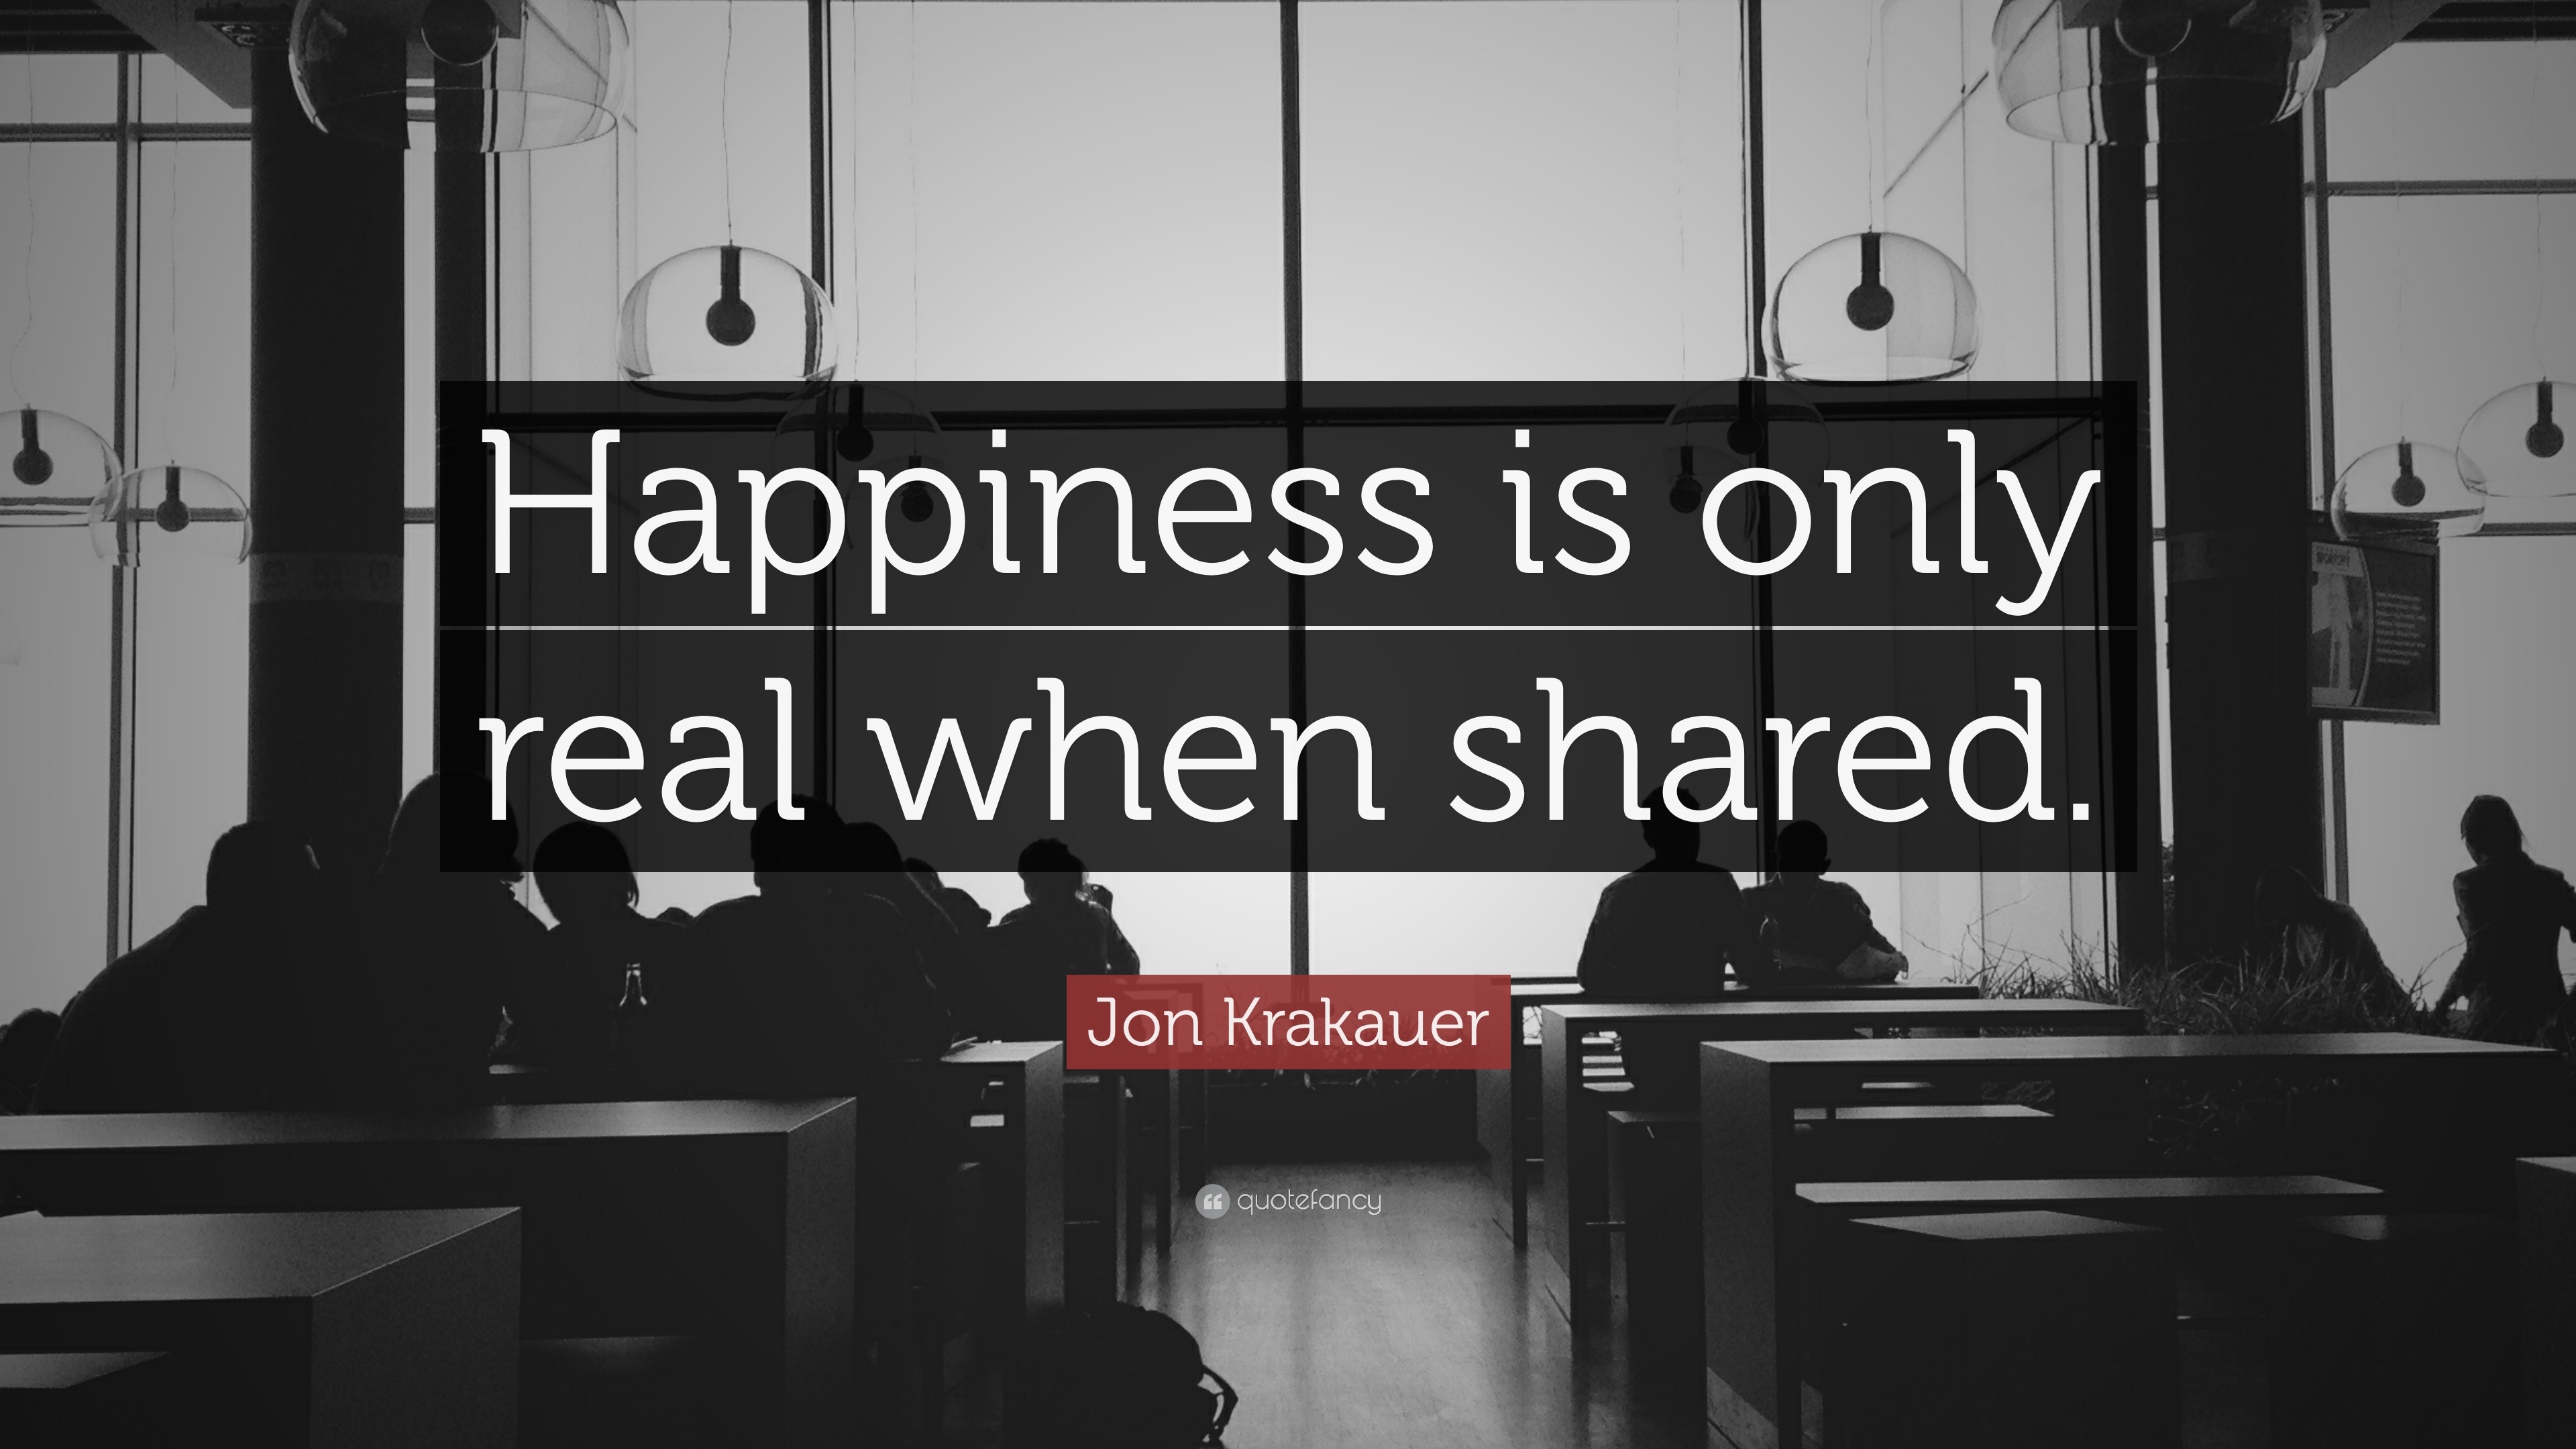 Jon Krakauer Quote: "Happiness is only real when shared. 